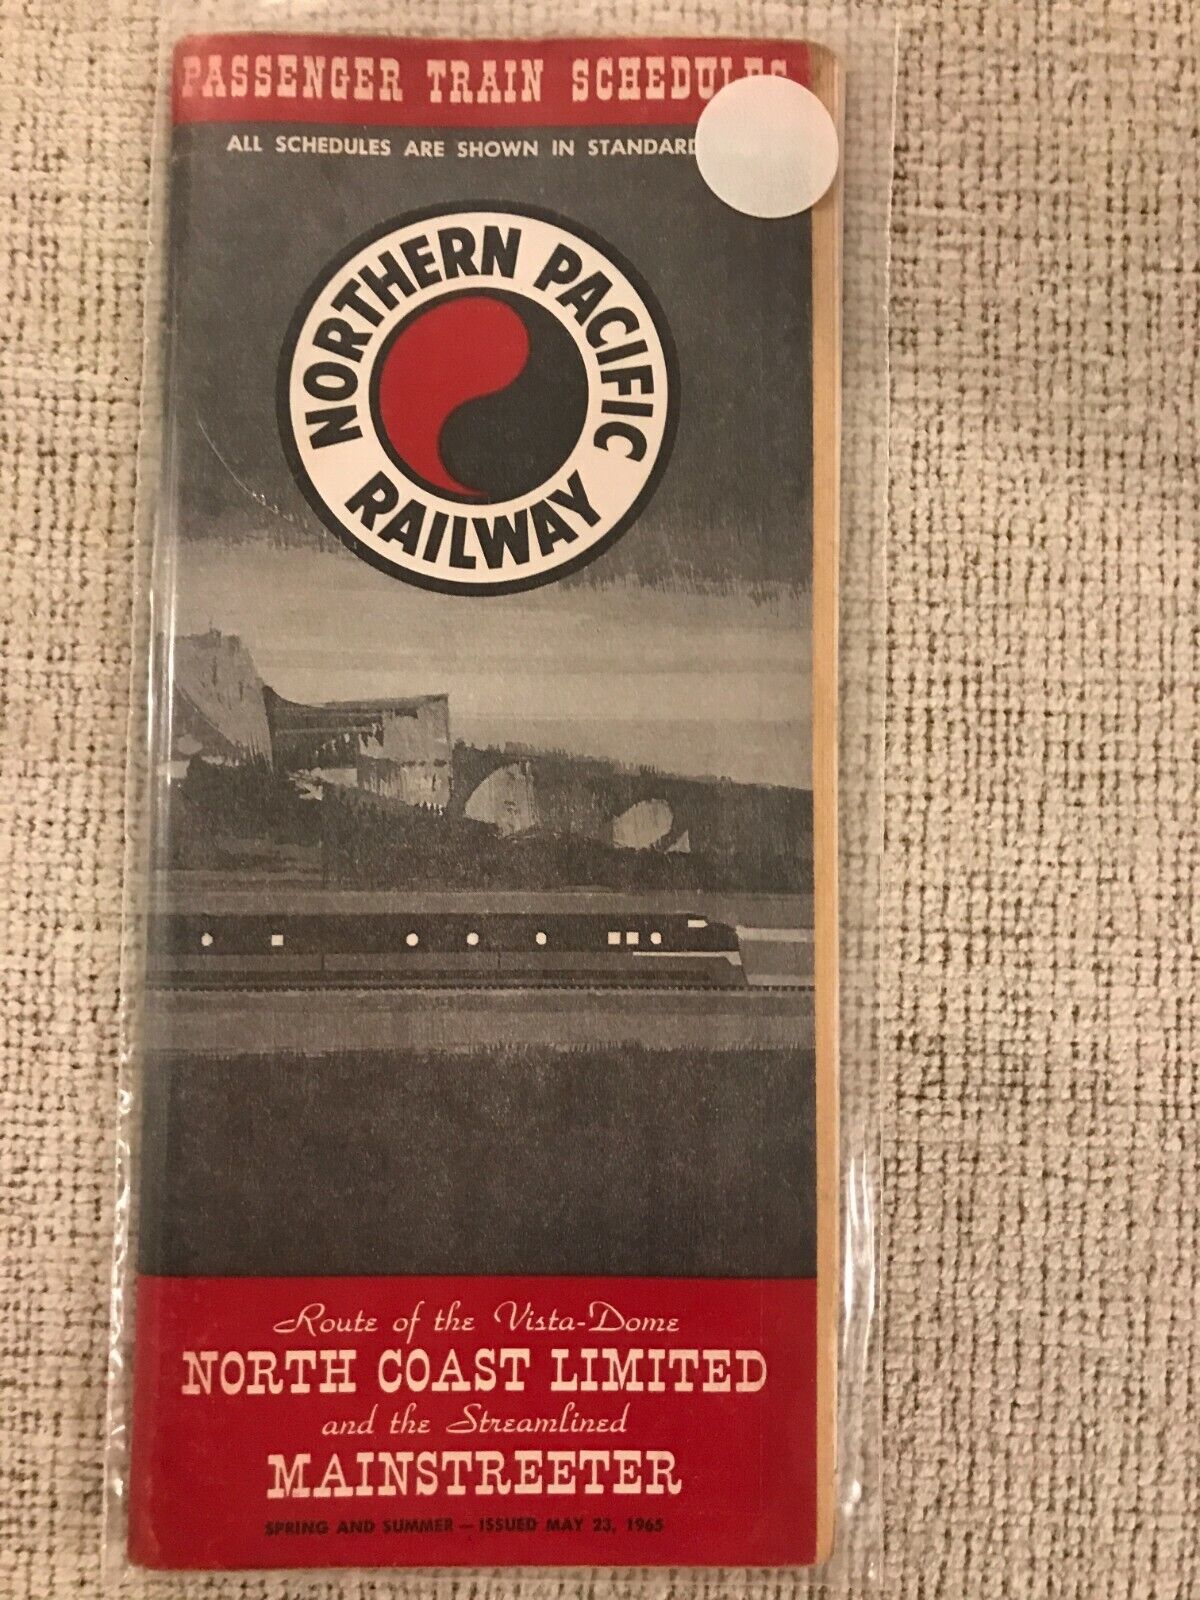 May 23, 1965 Northern Pacific Railroad Passenger Timetable.  Used